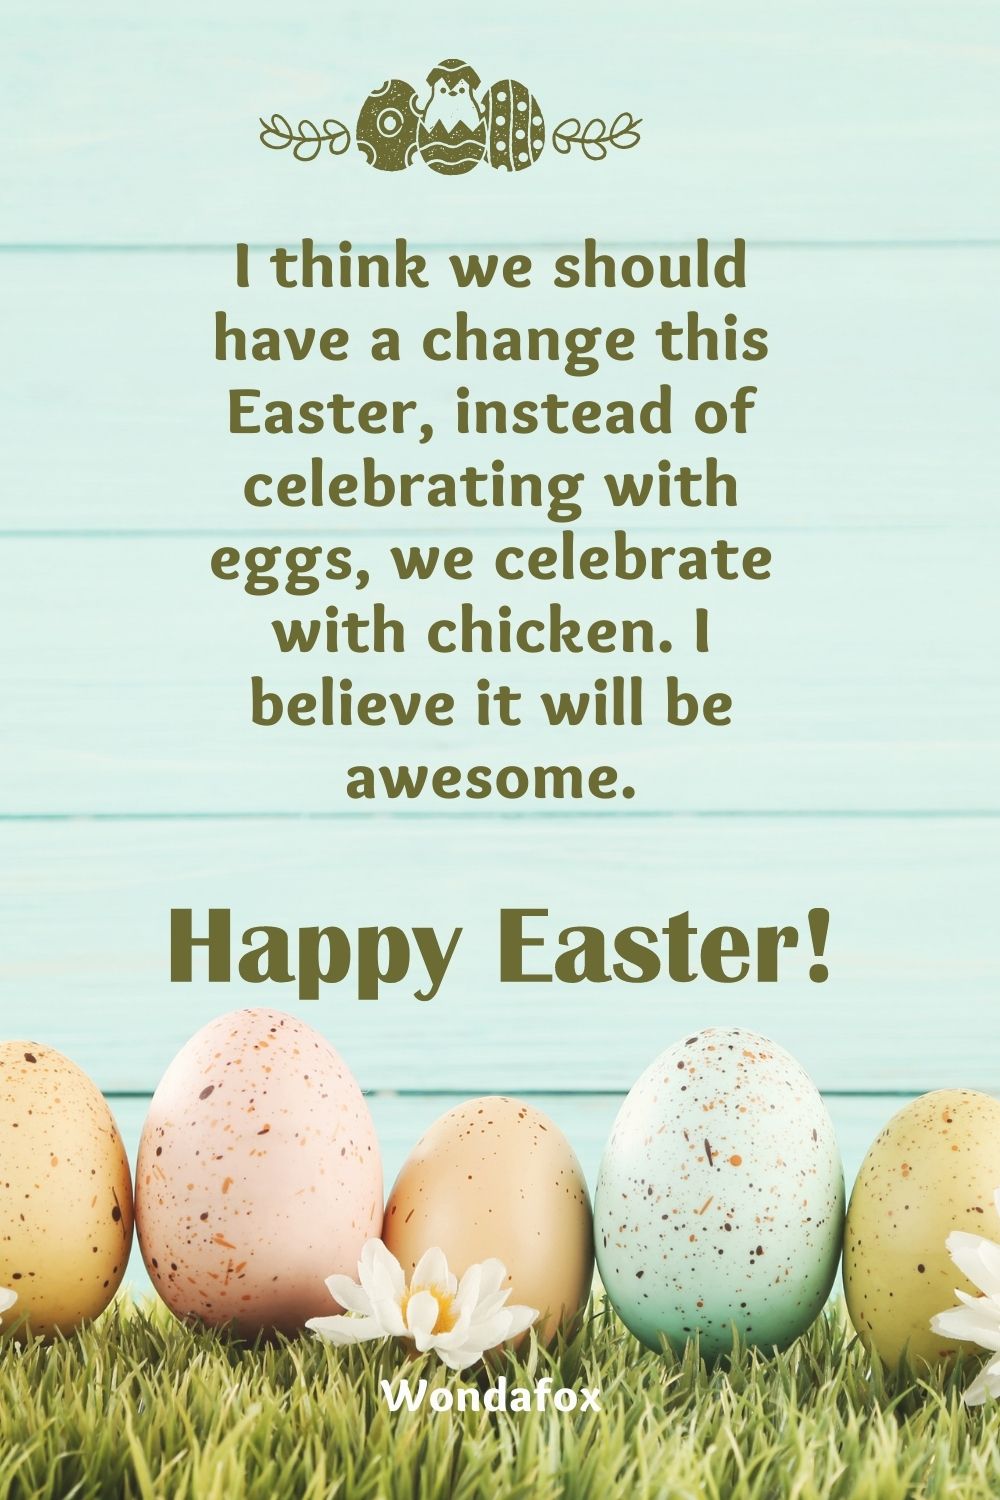 I think we should have a change this Easter, instead of celebrating with eggs, we celebrate with chicken. I believe it will be awesome. Happy Easter!